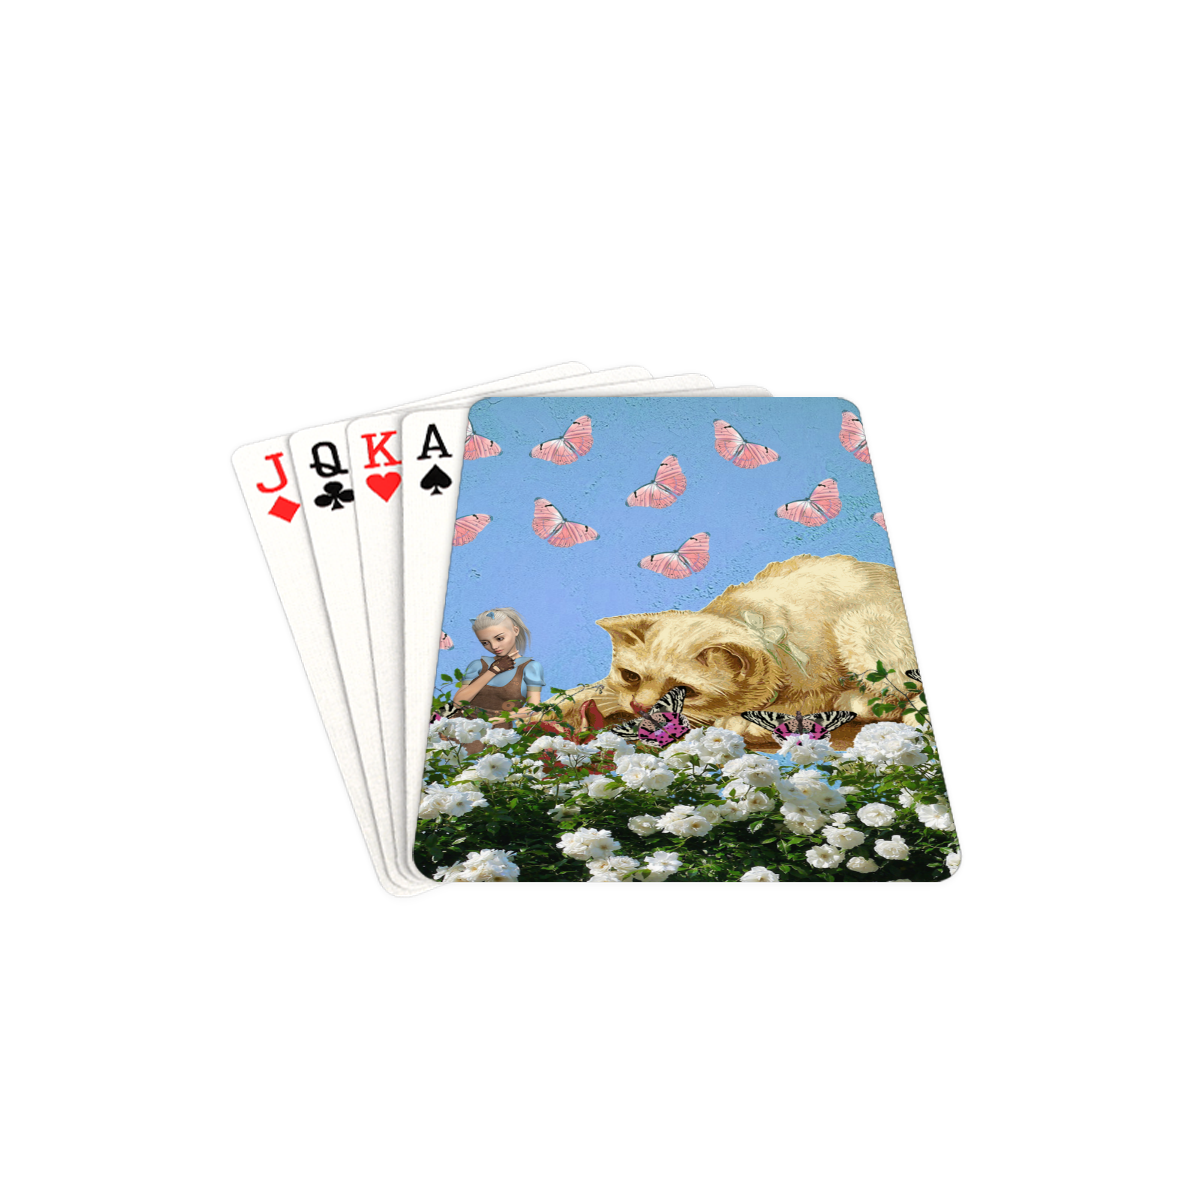 cat and butterflies Playing Cards 2.5"x3.5"